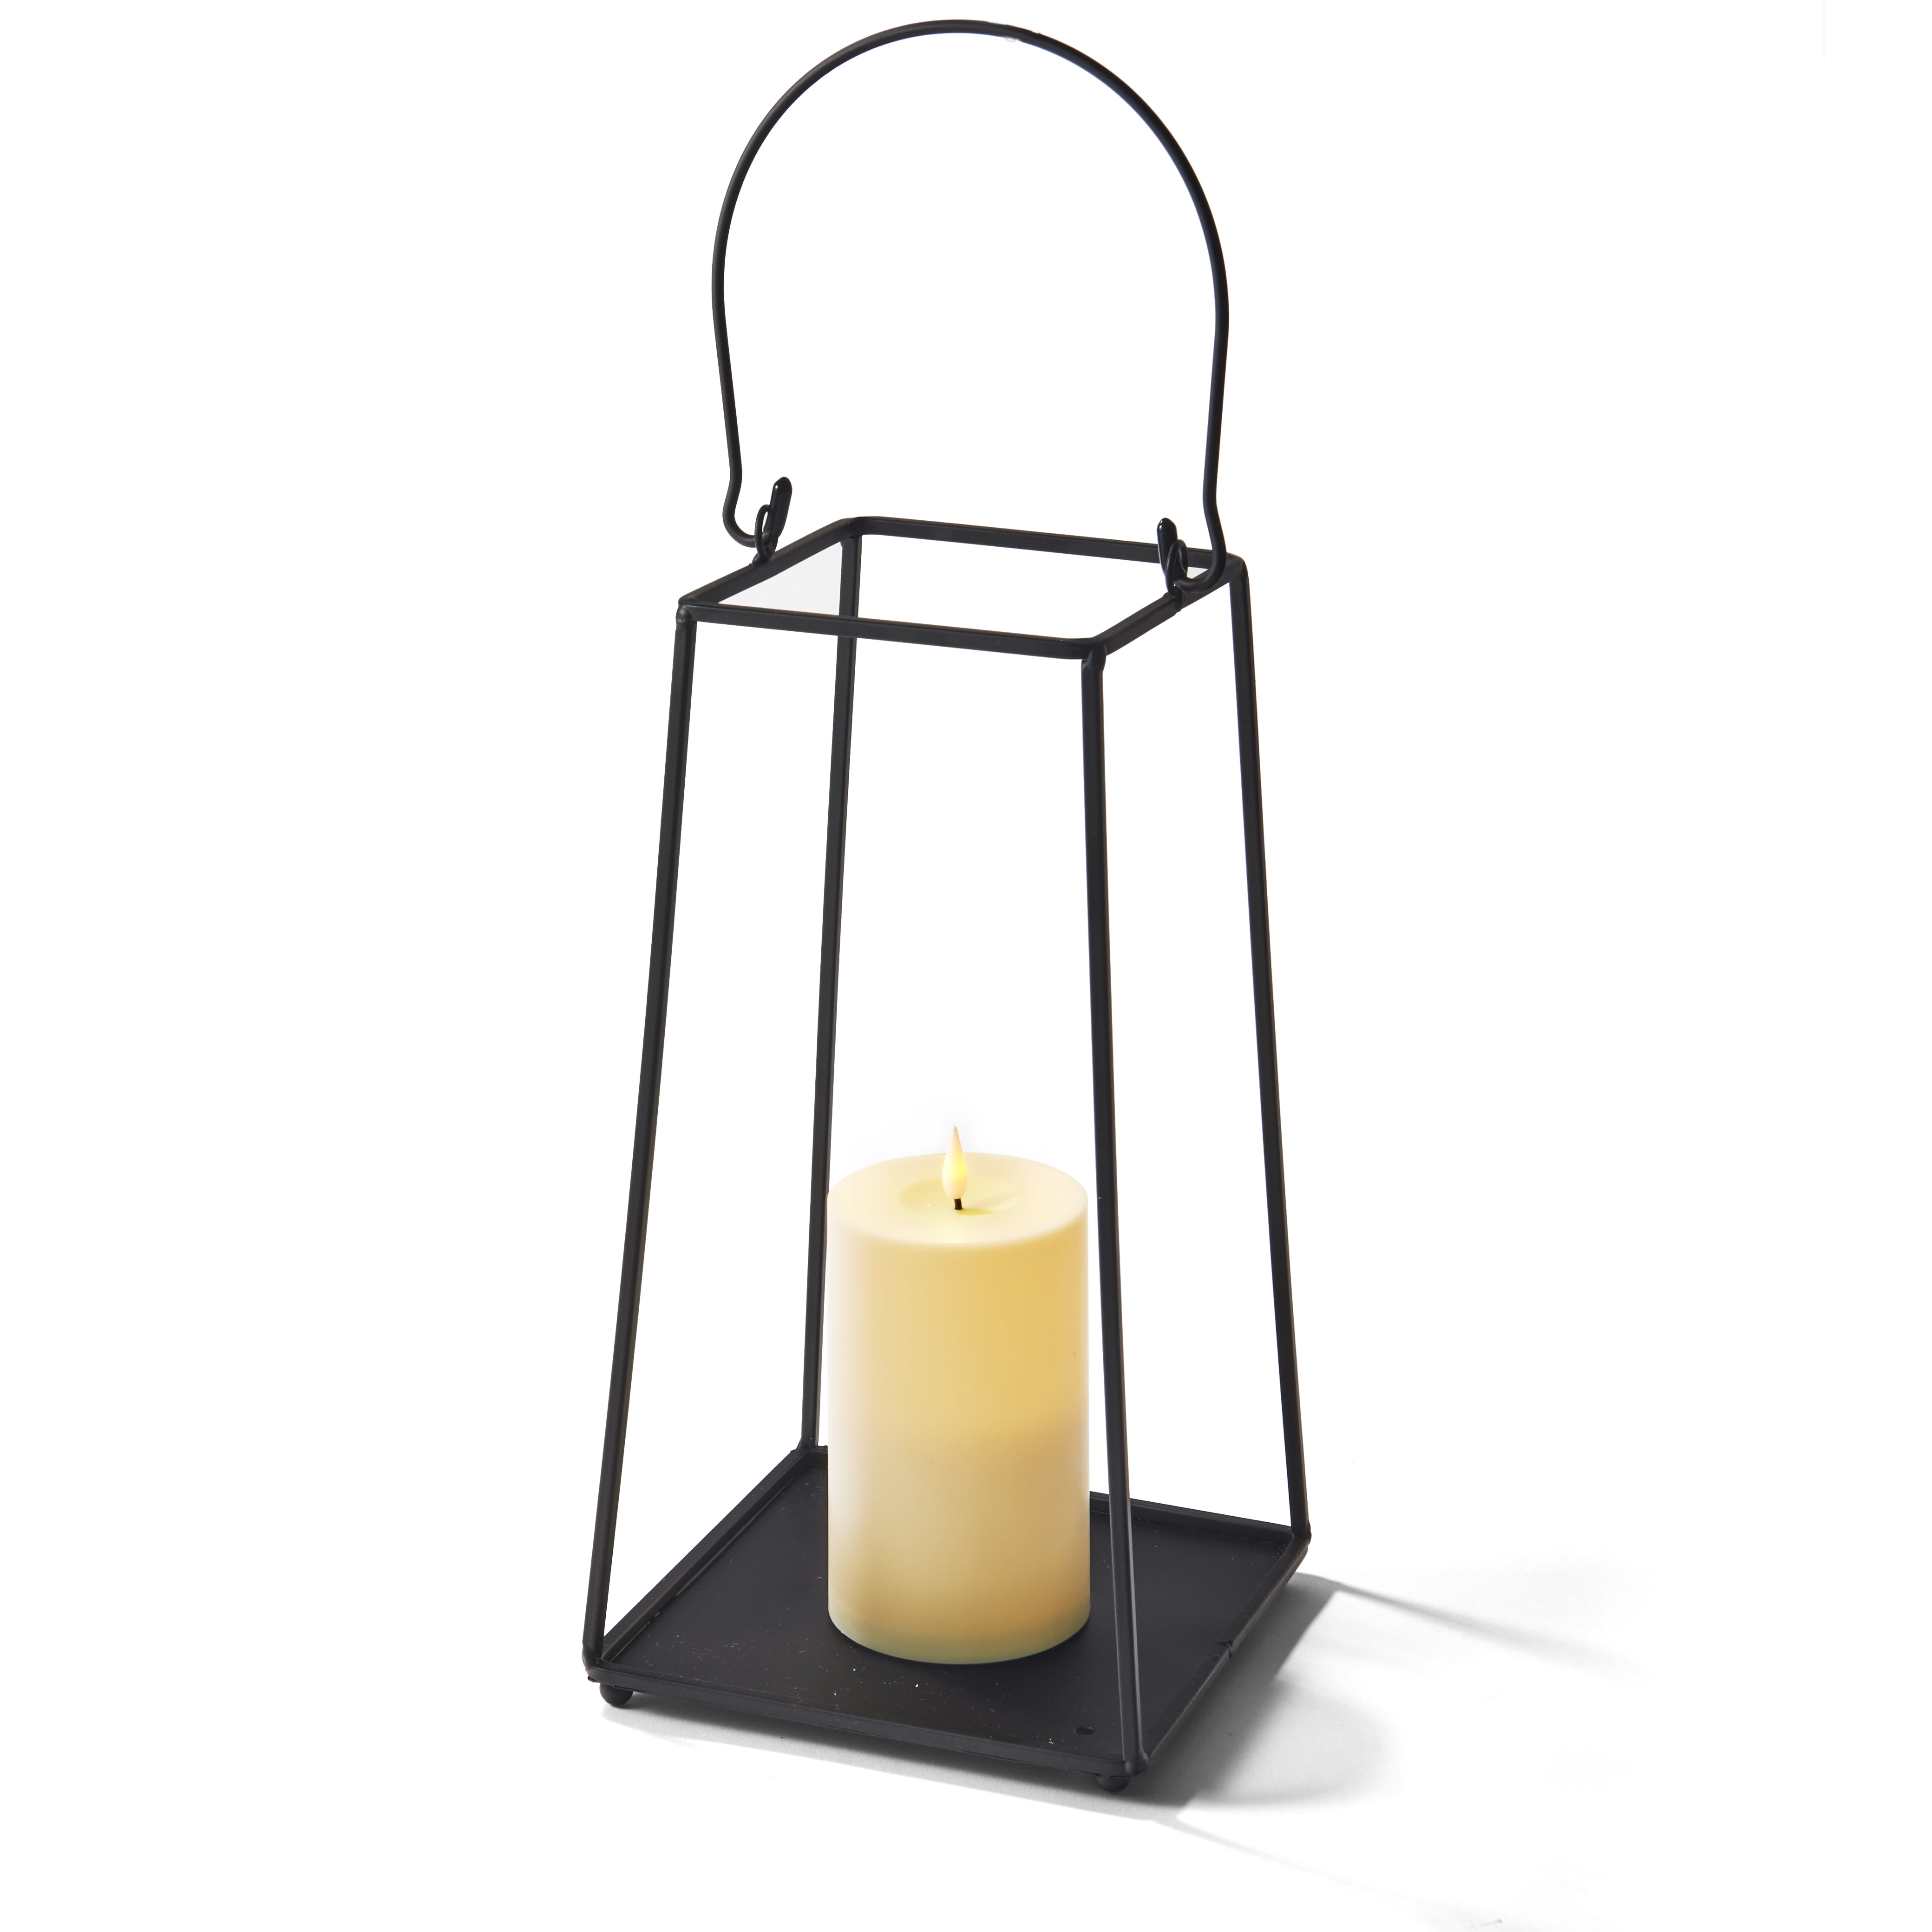 Lamplust Indoor Outdoor Lanterns Decorative Lantern Set of 2, 8 inch Battery Operated Candle Lantern, Black Metal with No Glass, Flameless LED